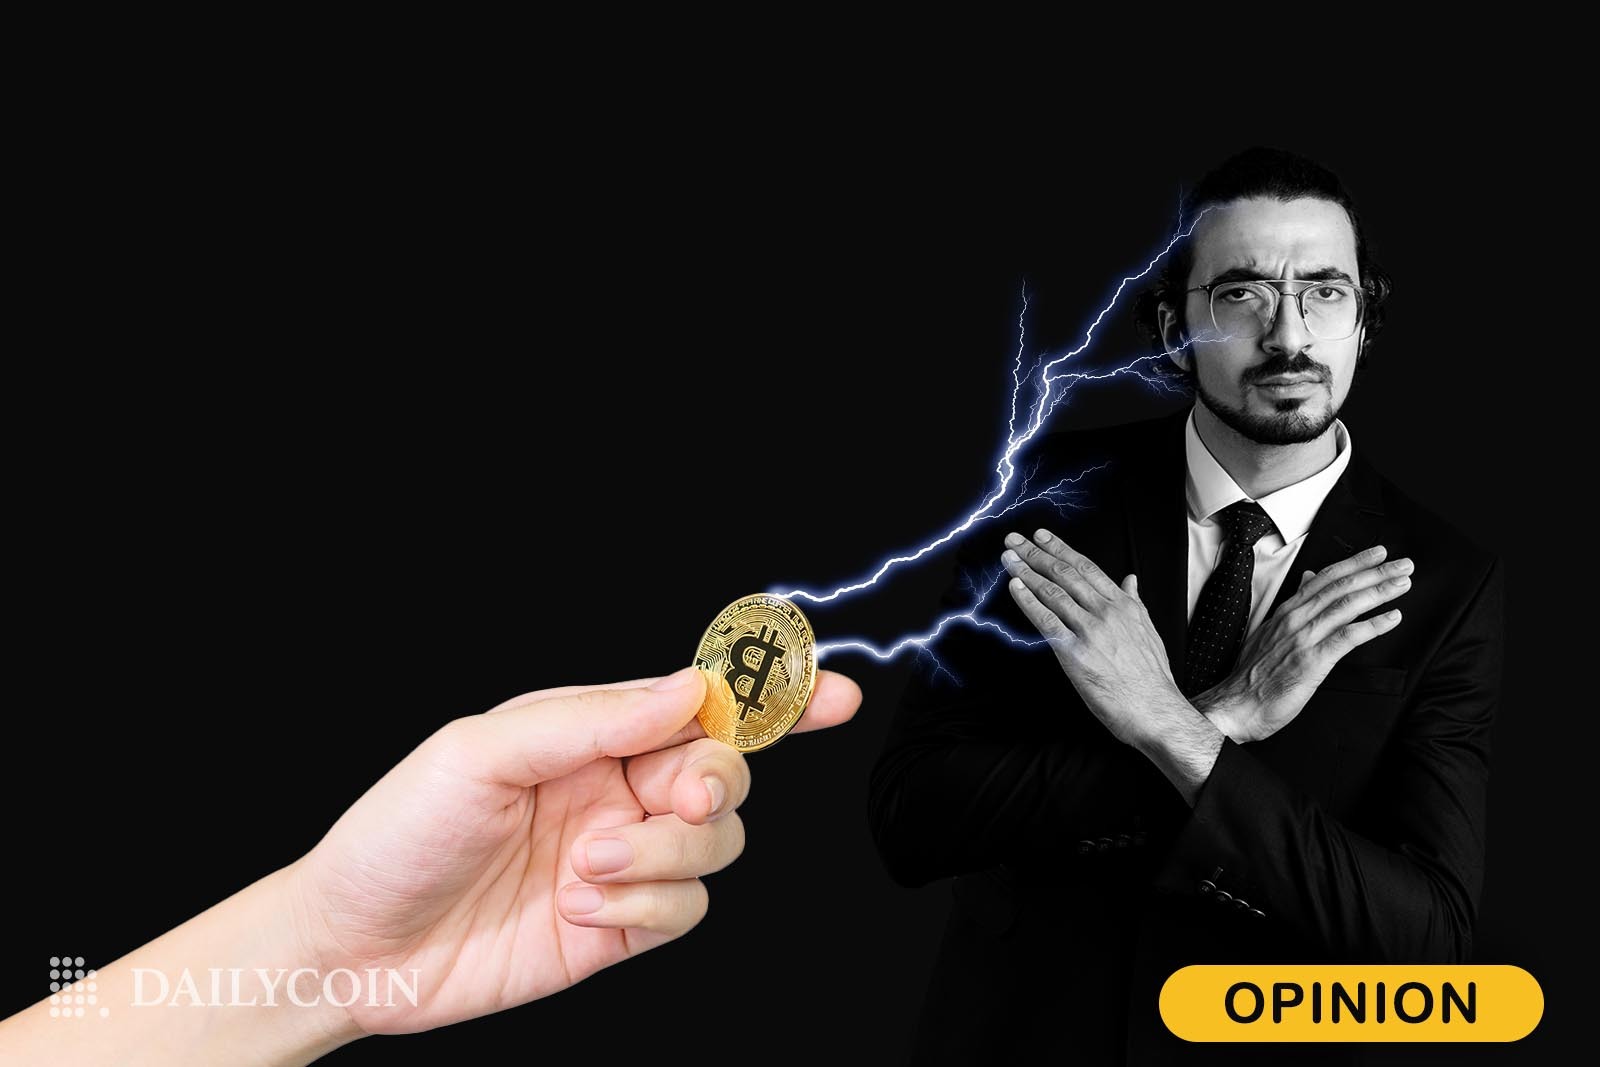 signature bank crypto article- the hand holds golden bitcoin coin and offers it to the man in the black background who refuses to take it